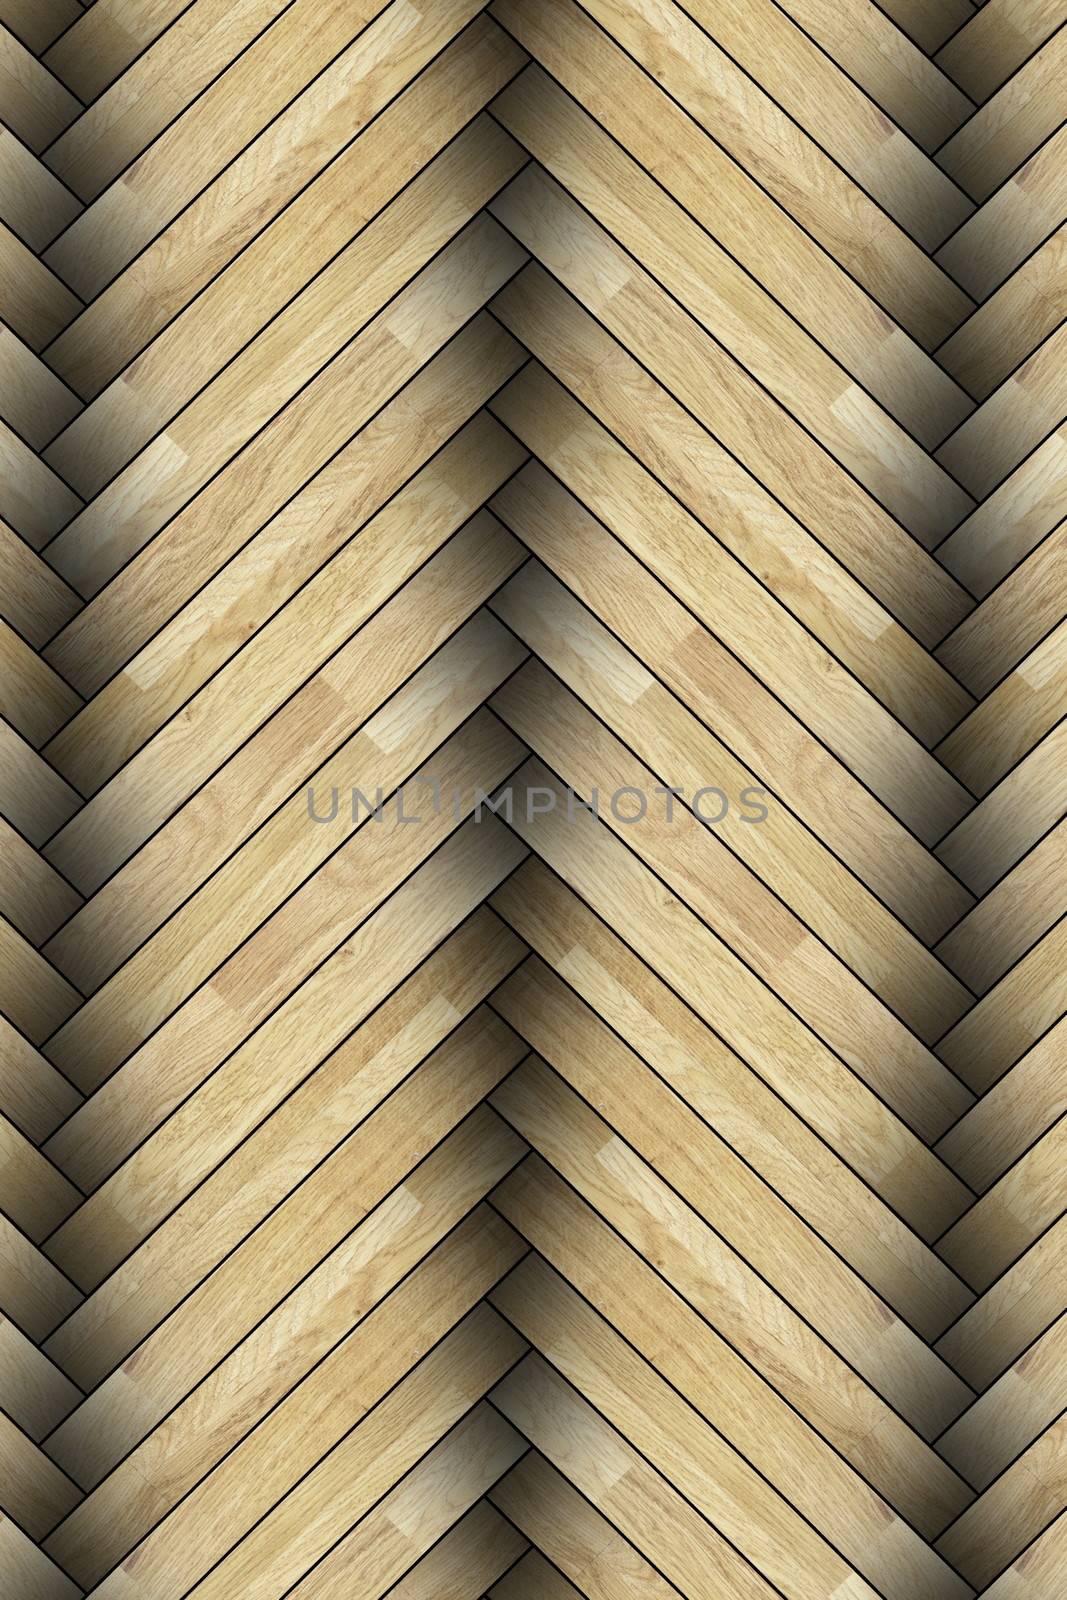 close up of laminated floor pattern by taviphoto